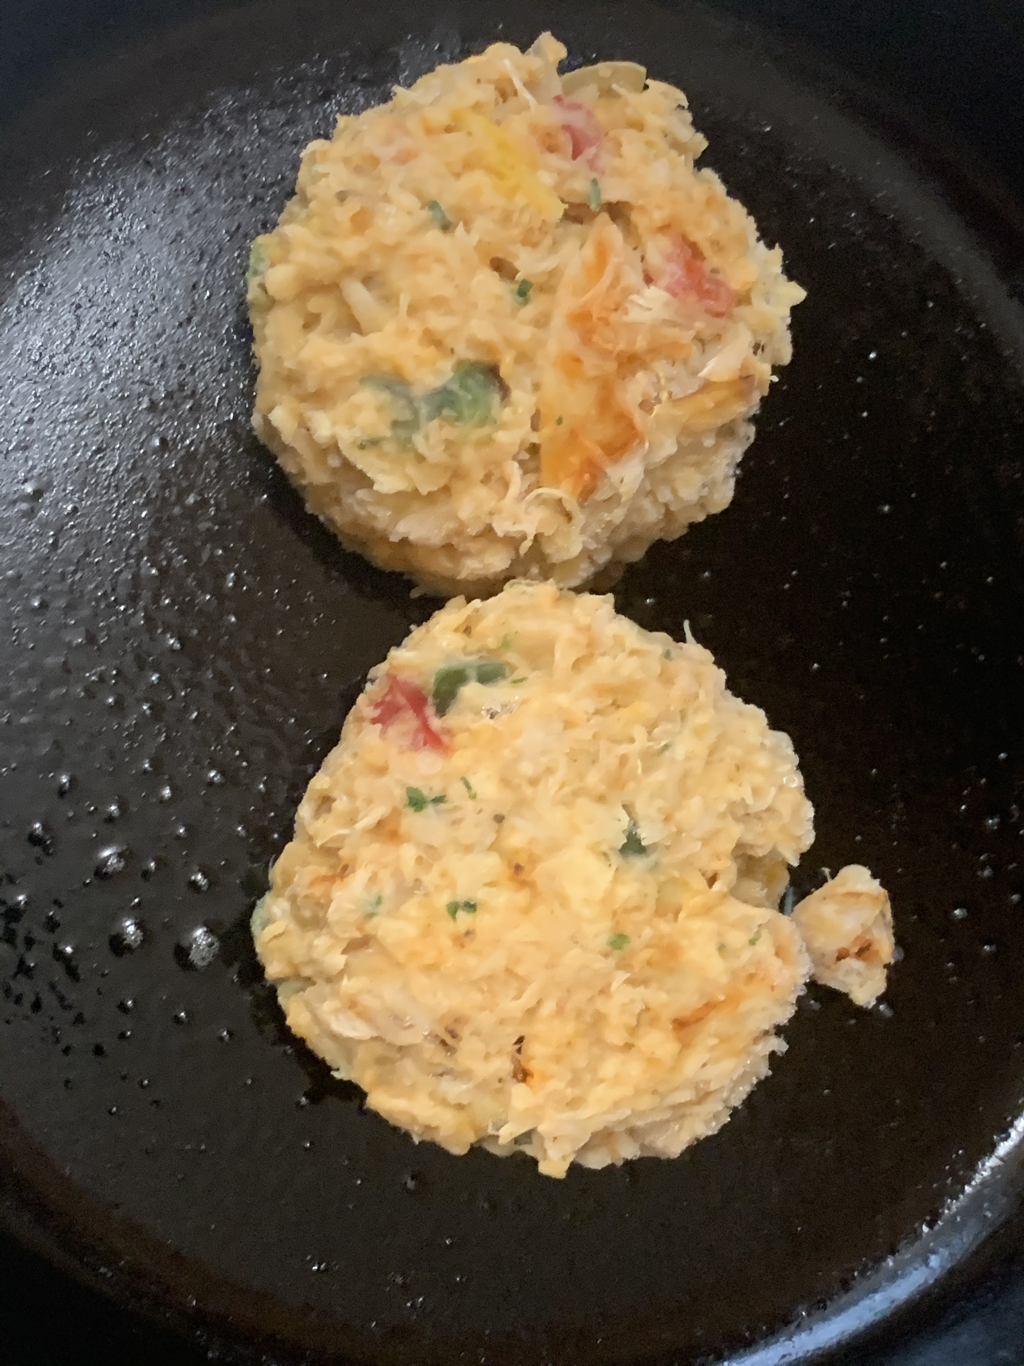 Aldi Specially Selected Boardwalk Crab Cakes Review - Before Cooking